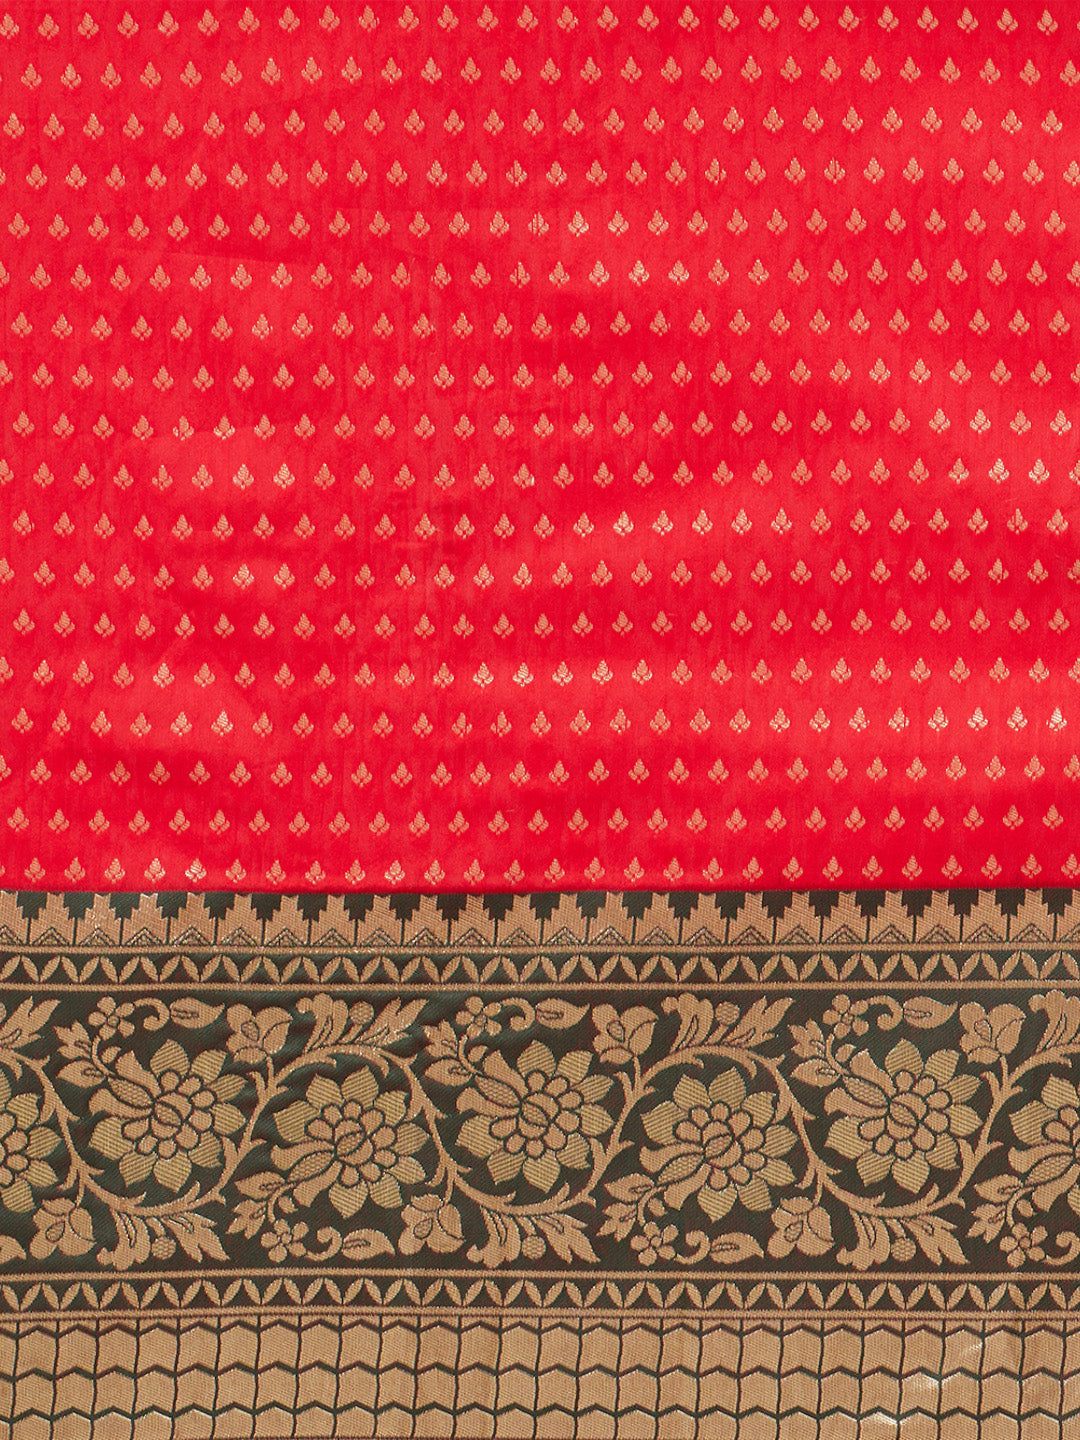 Red Art Silk Woven Design Saree With Blouse